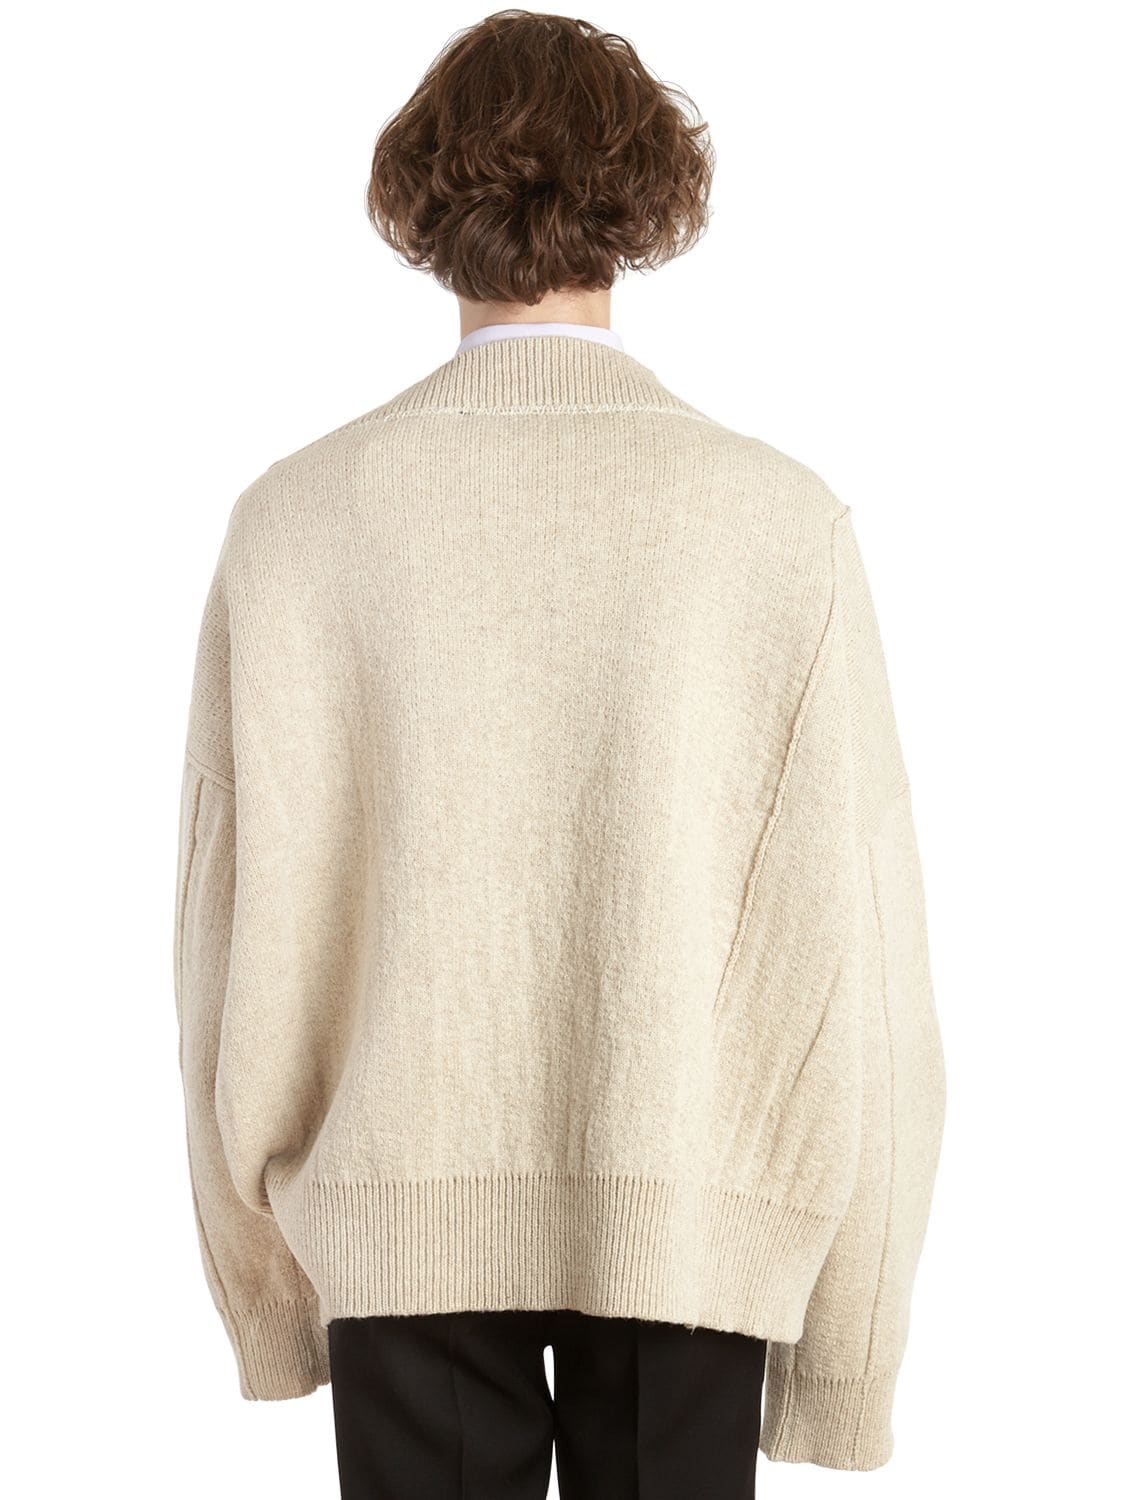 Raf Simons Oversized Wool Knit Sweater W/ Buckle In Off White